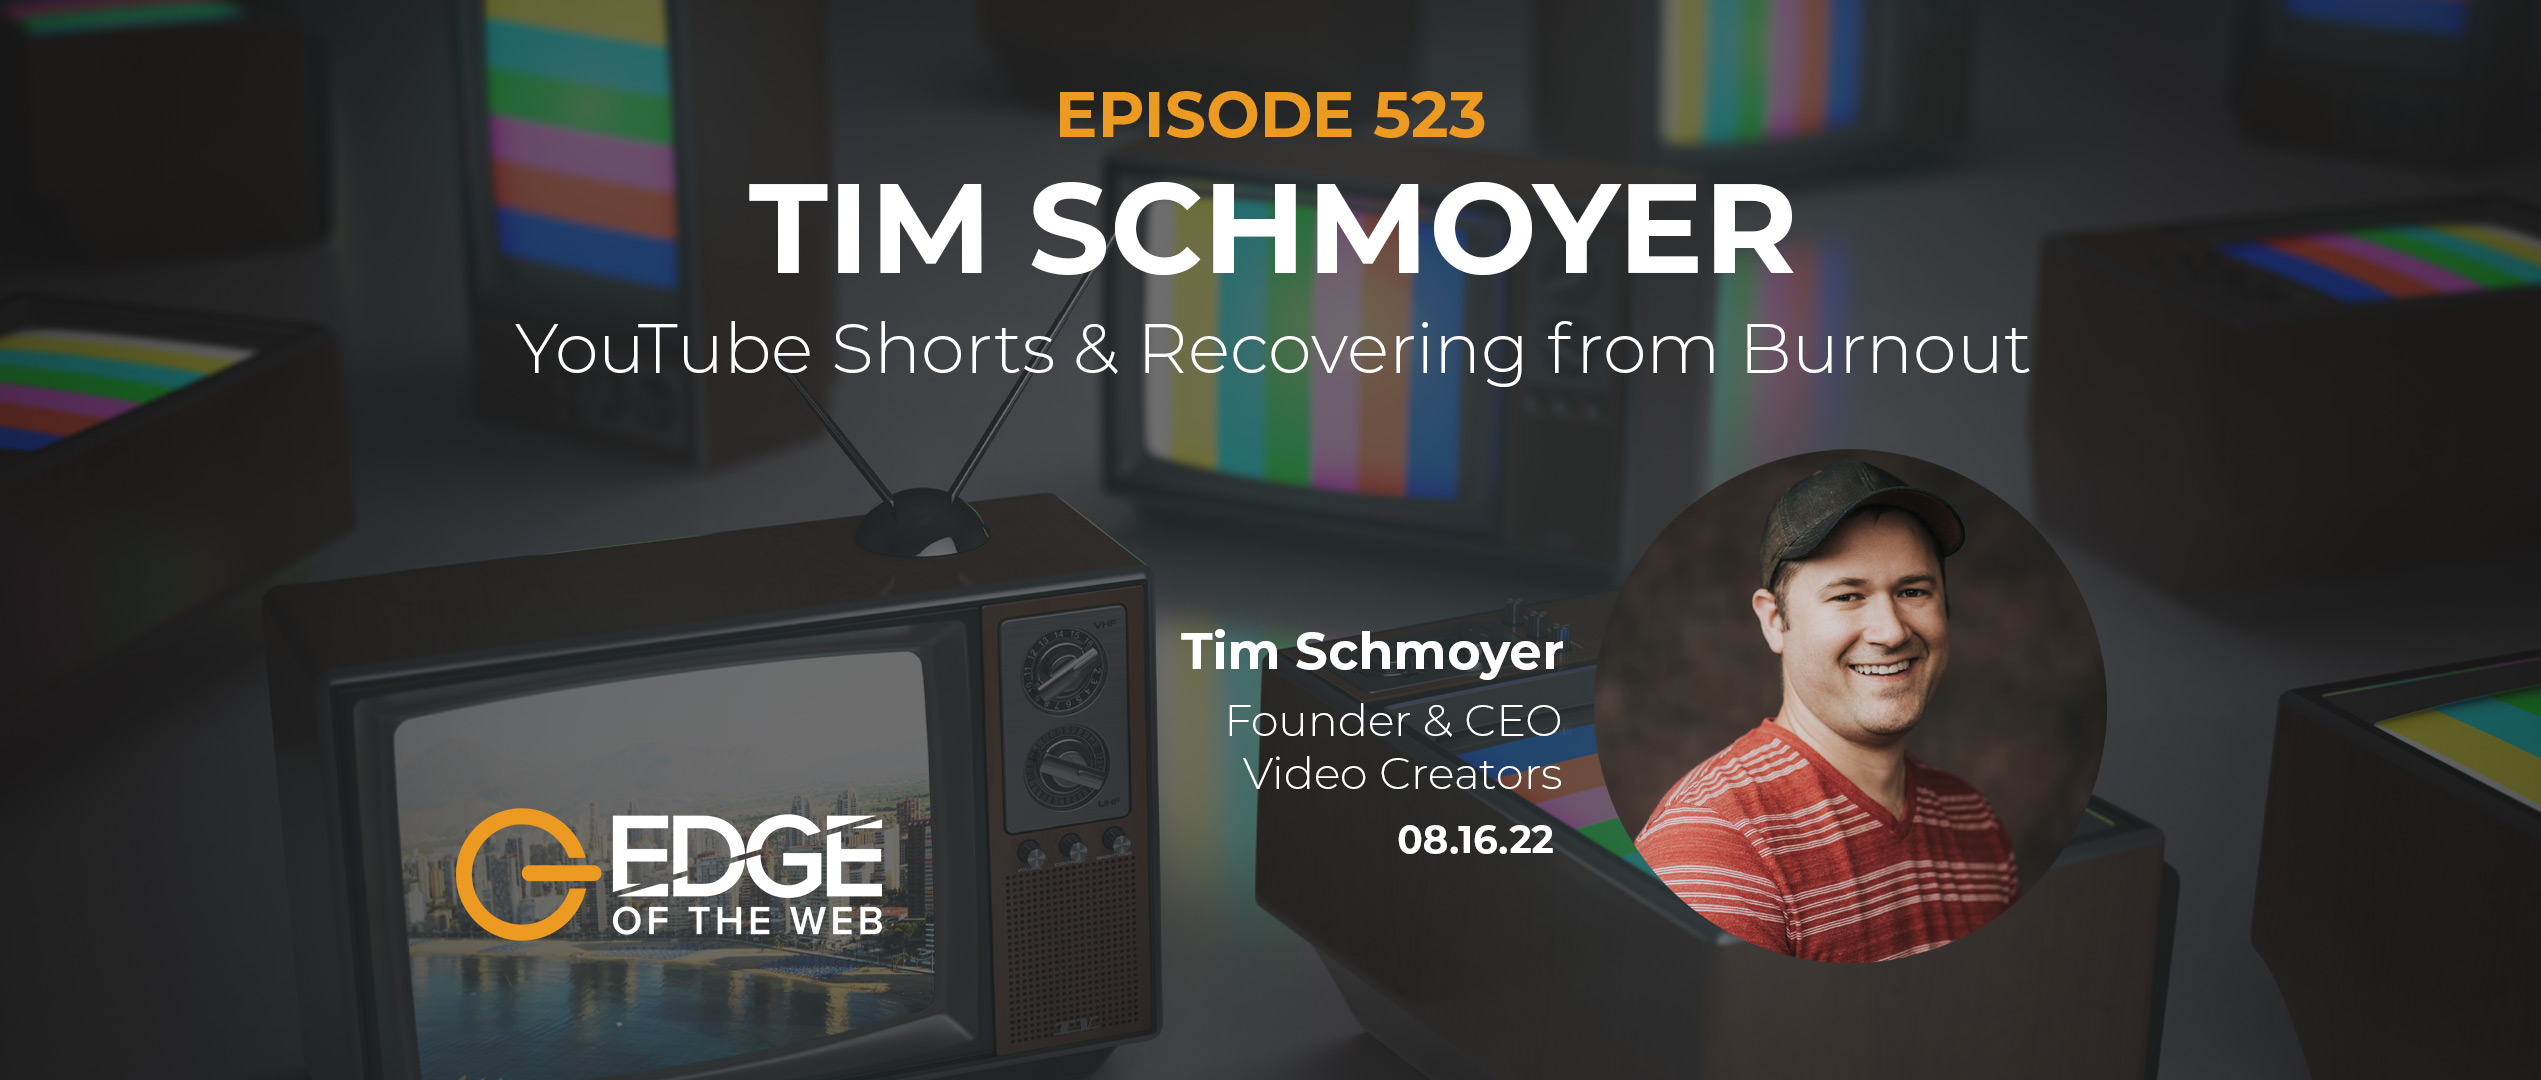 523 | YouTube Shorts & Recovering from Burnout w/ Tim Schmoyer